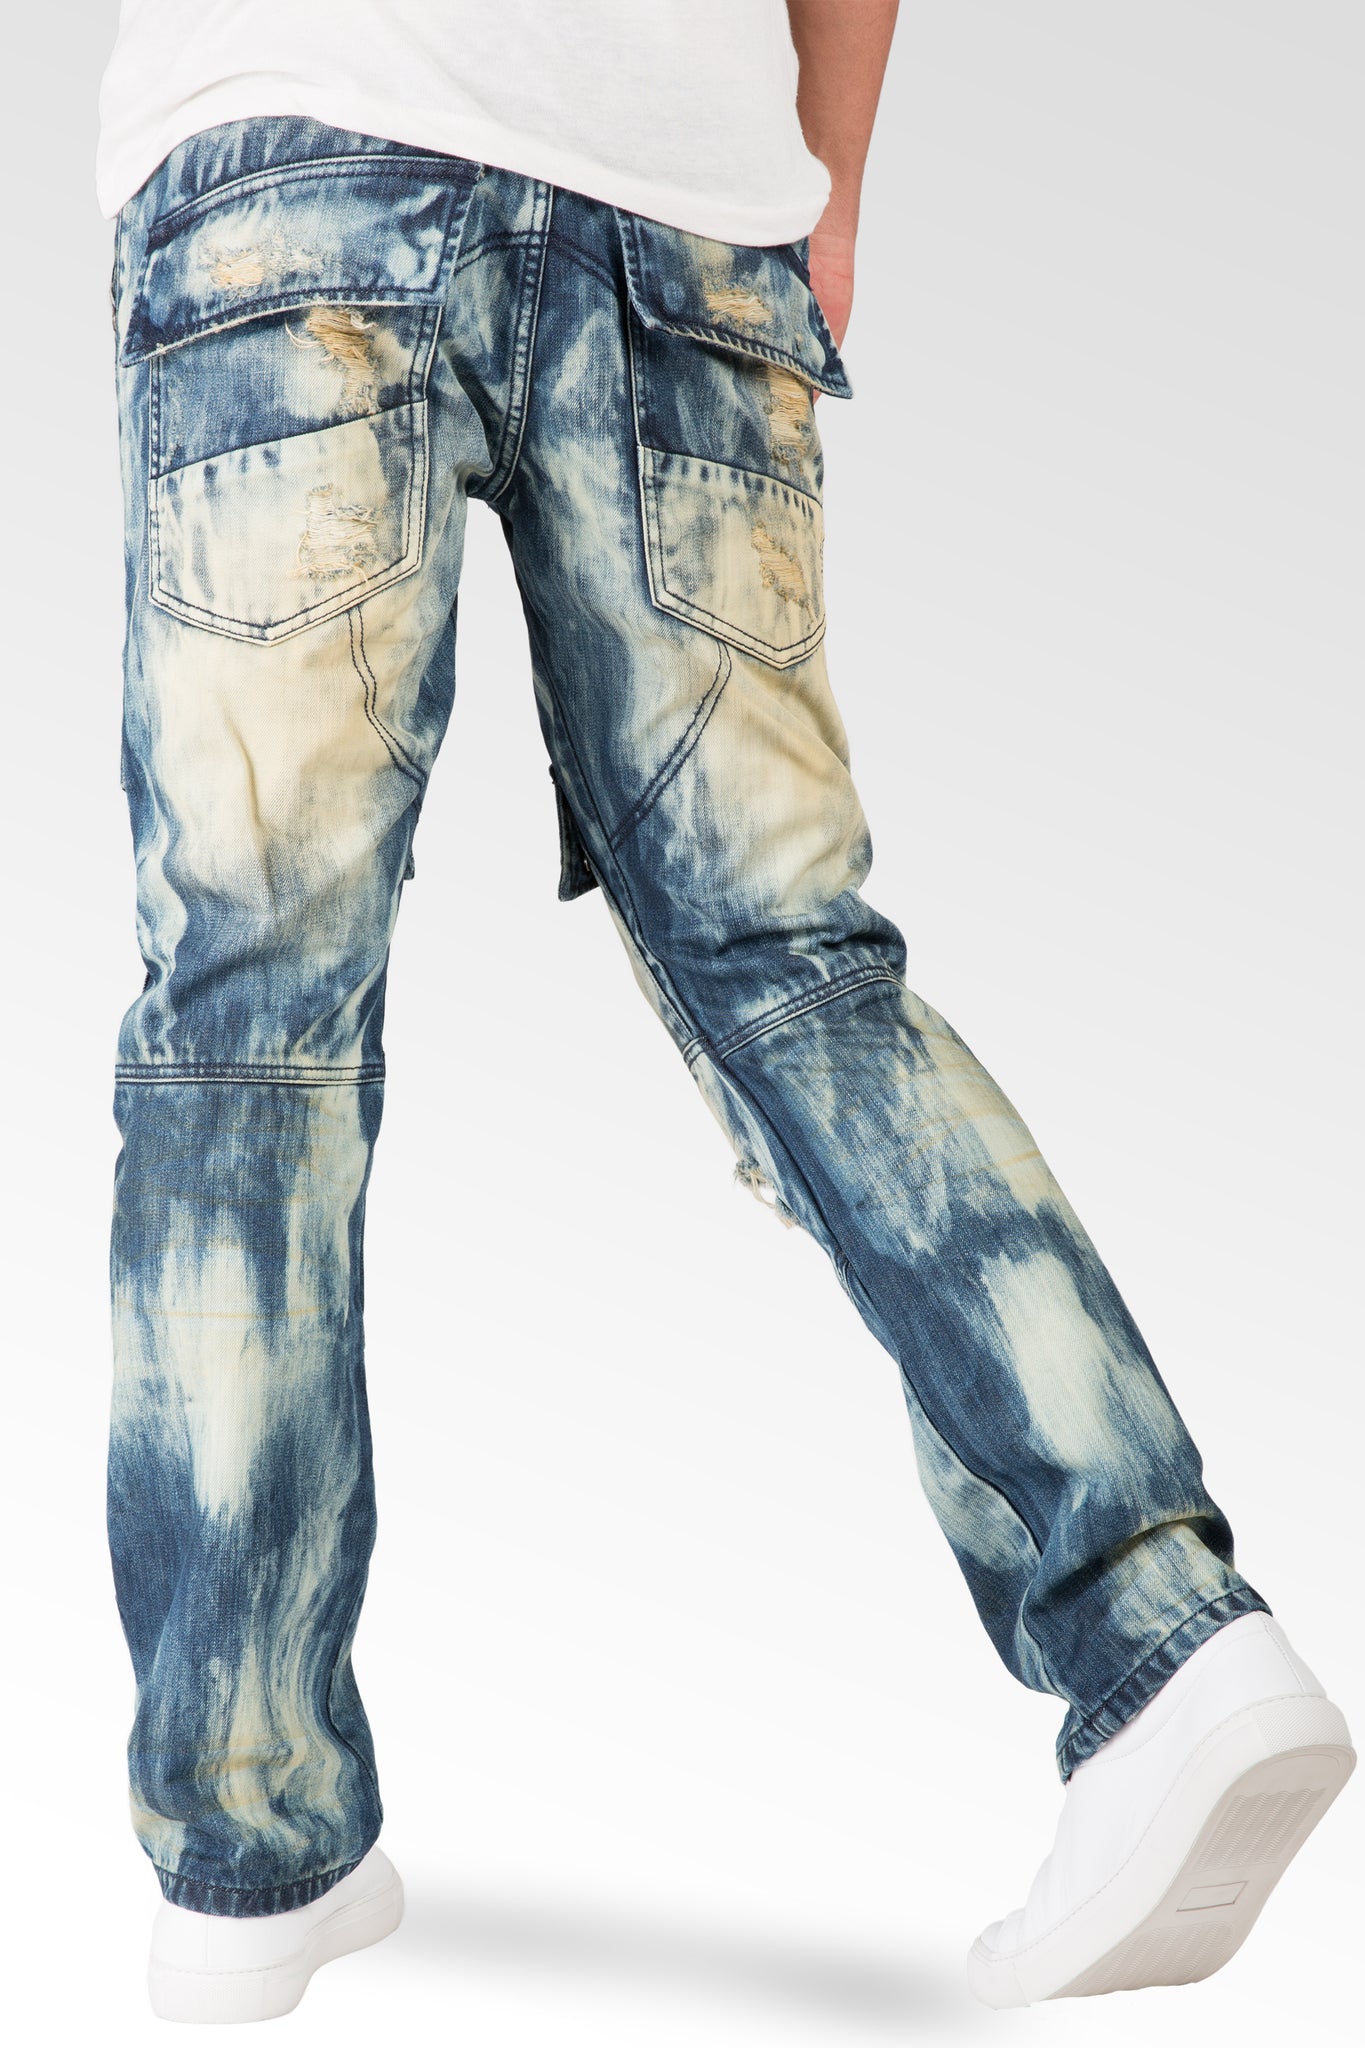 Slim Straight Premium Denim Tainted Front Cargo Pocket Jeans Ripped Mended